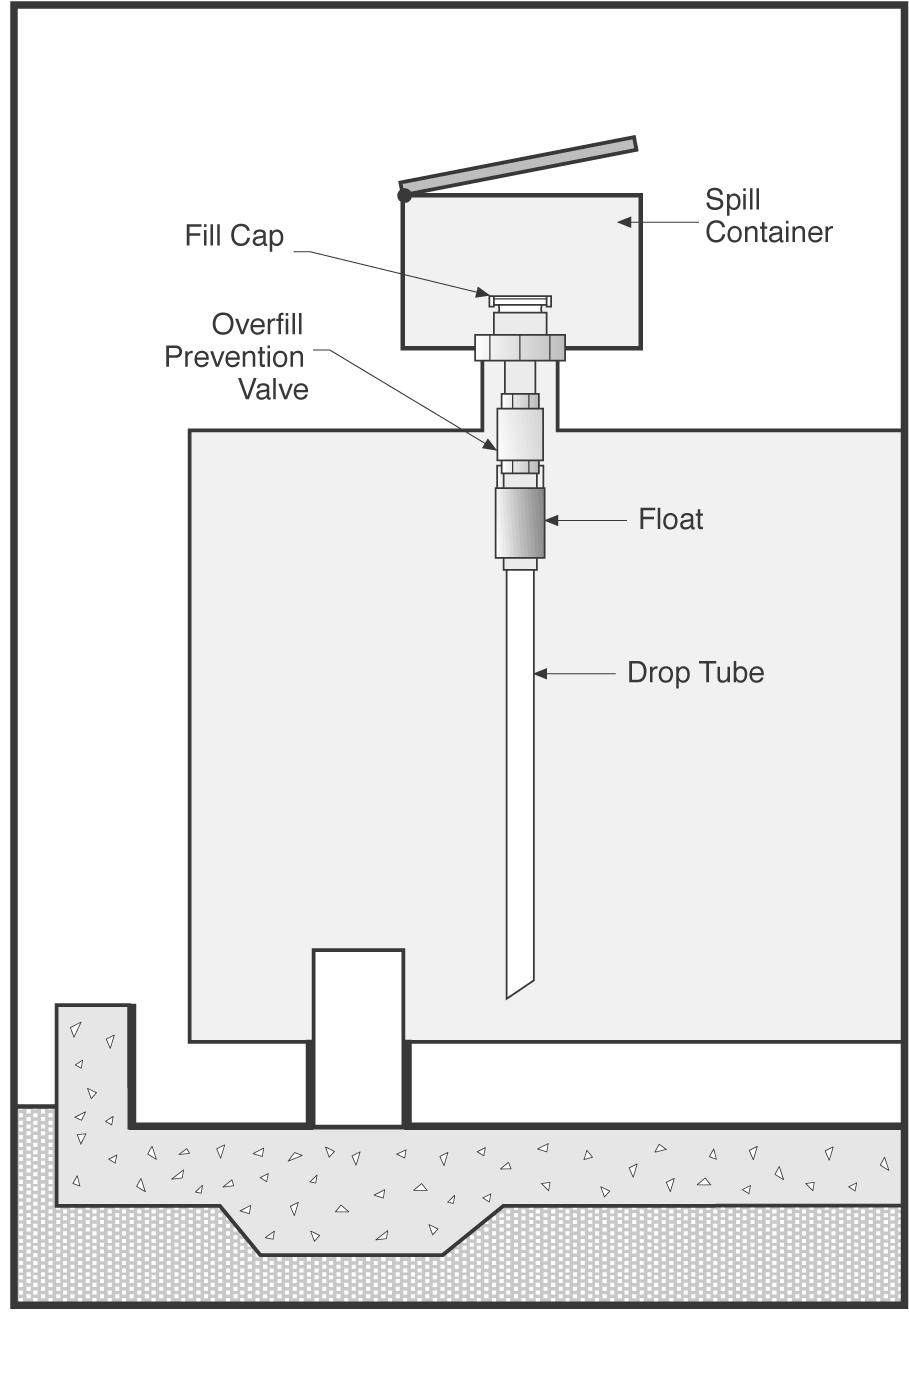 Typical Overfill prevention valve installed in fill as level in the AST